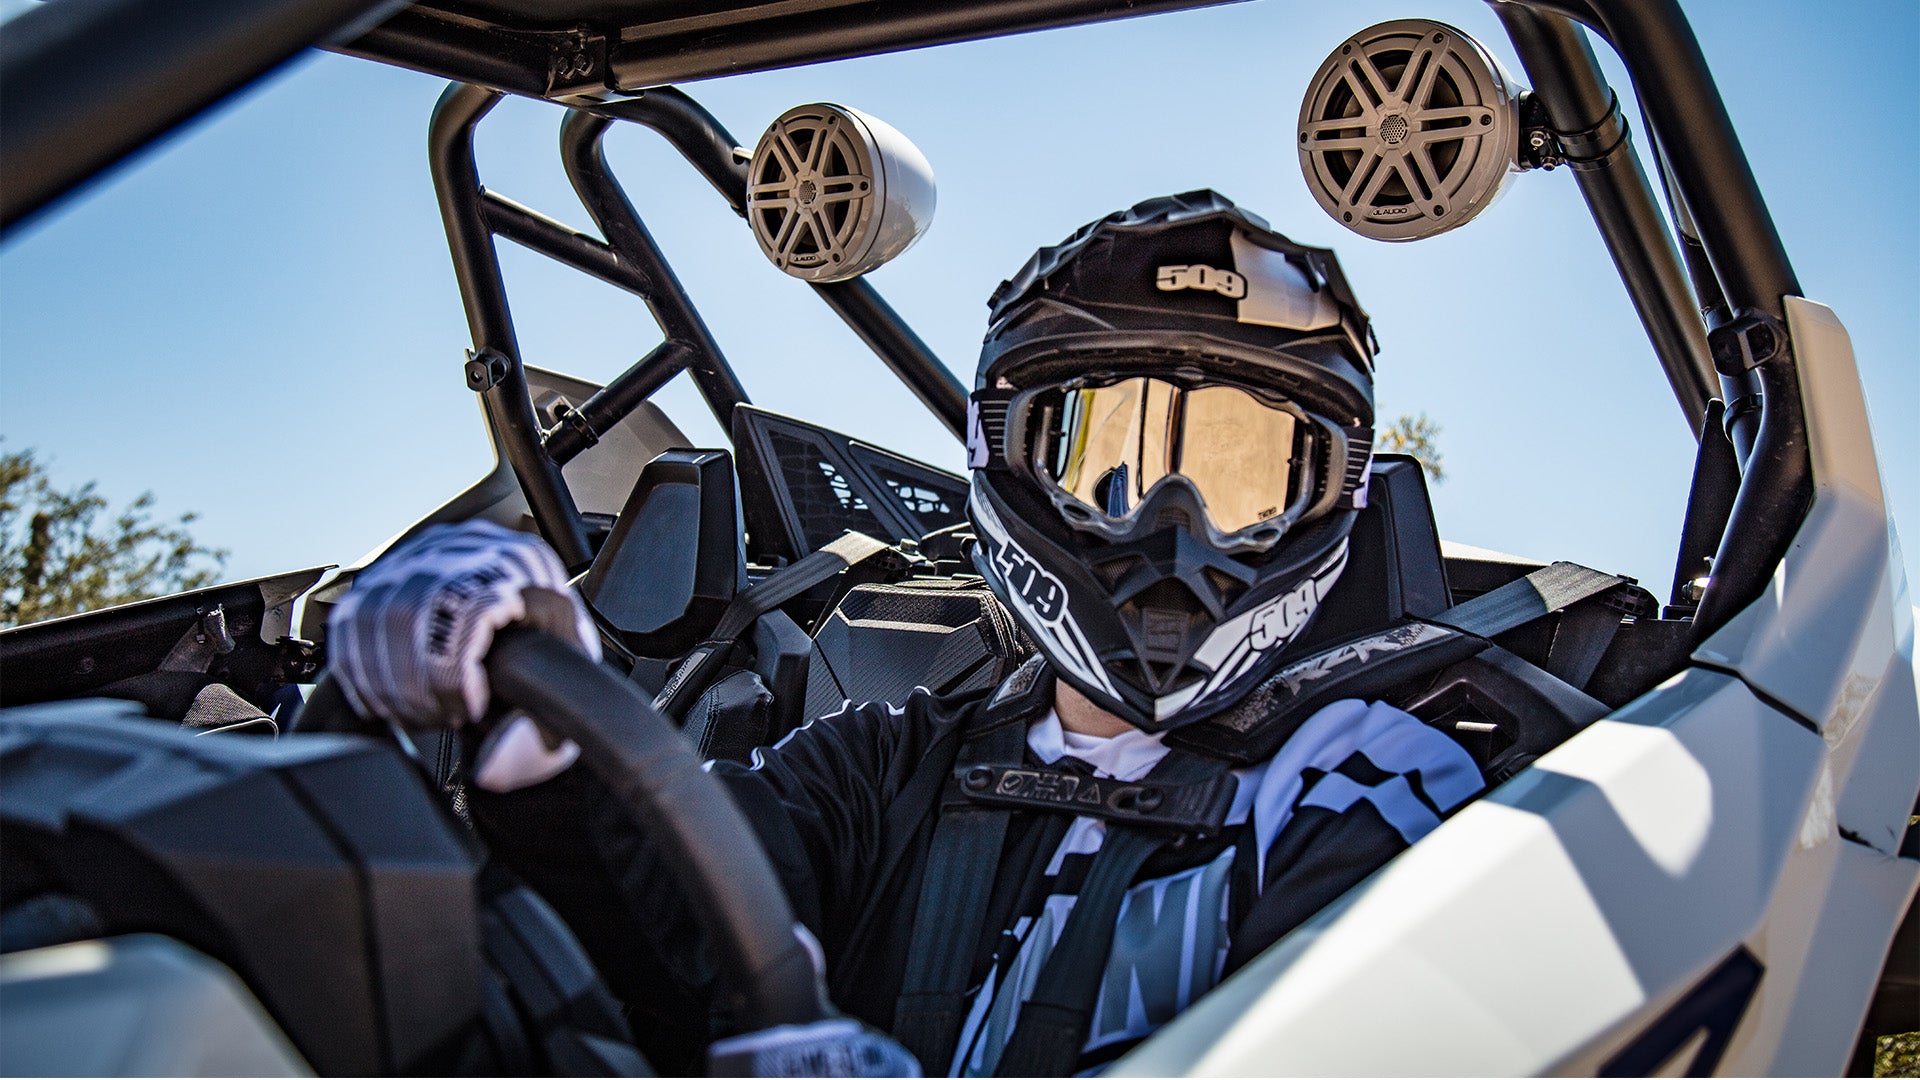 A powersports driver with helmet and gear sitting in a vehicle with install VeX audio system.